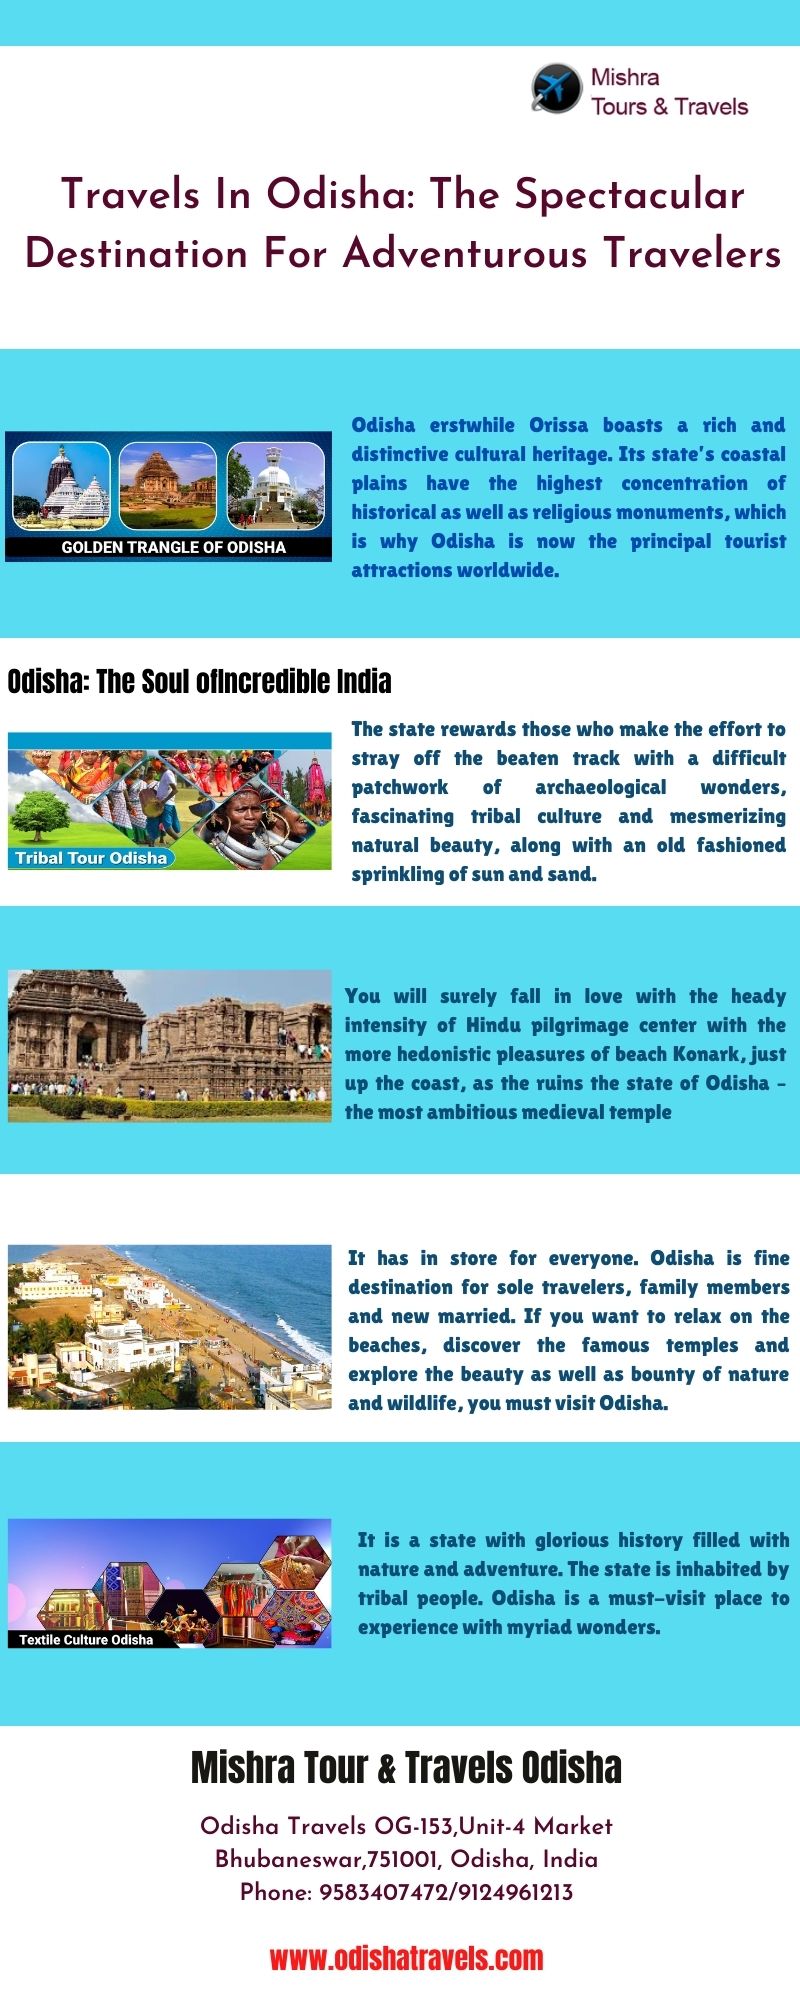 Travels In Odisha: The Spectacular Destination For Adventurous Travelers Its state’s coastal plains have the highest concentration of historical as well as religious monuments, which is why Odisha is now the principal tourist attractions worldwide. For more details, visit this link: https://bit.ly/35LxnAa
 by Odishatravels